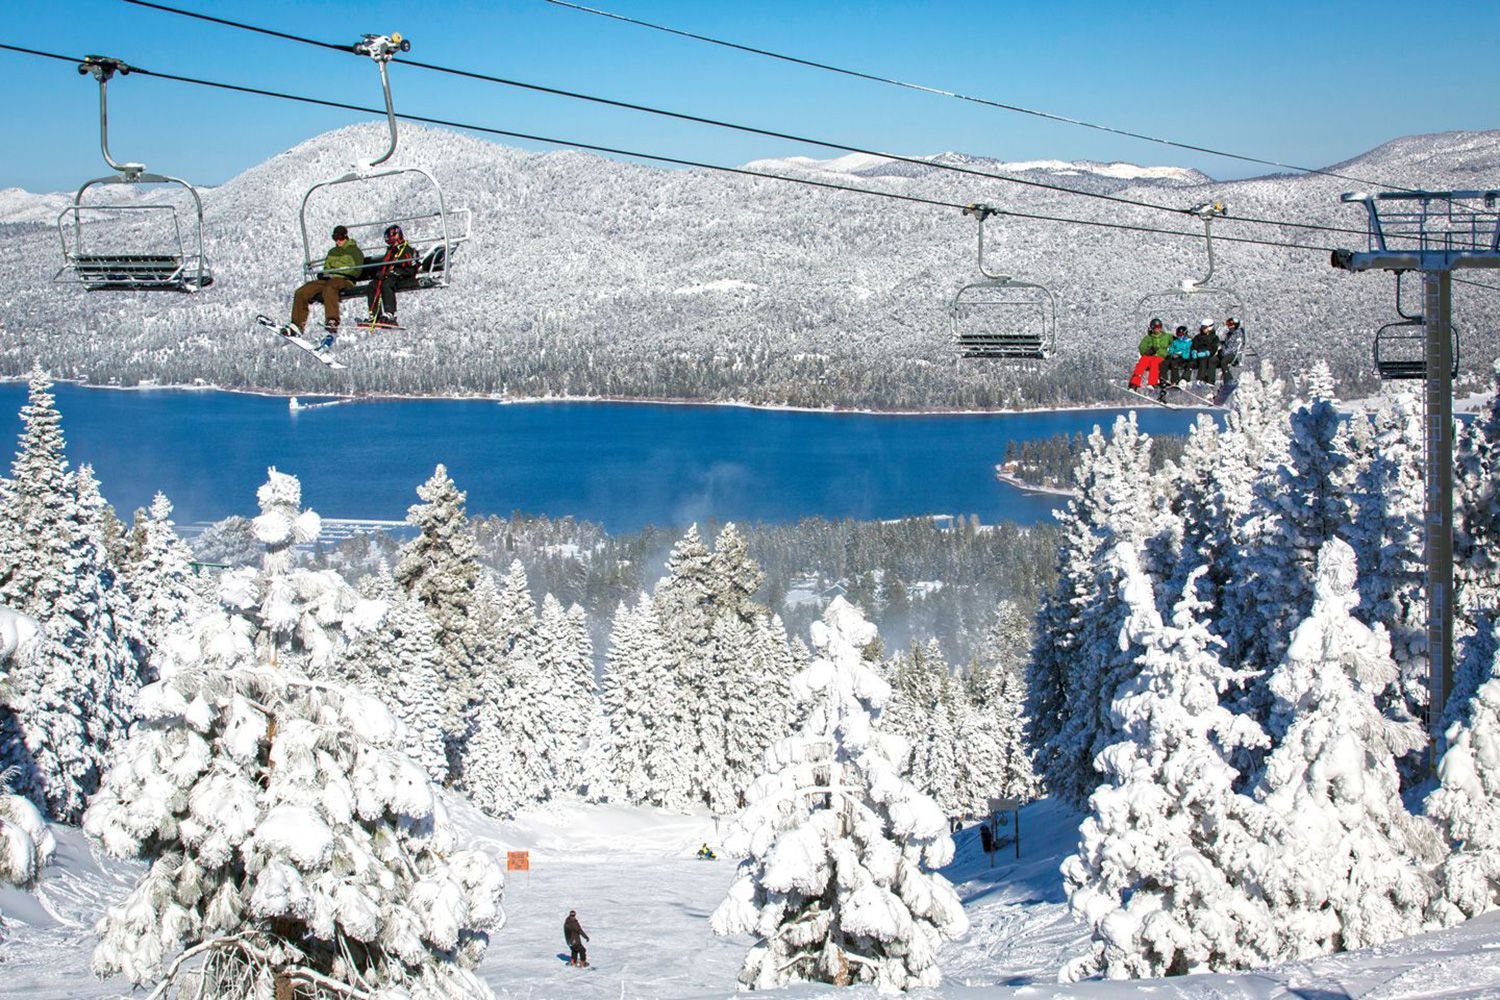 The Best Ski Destinations in Southern California